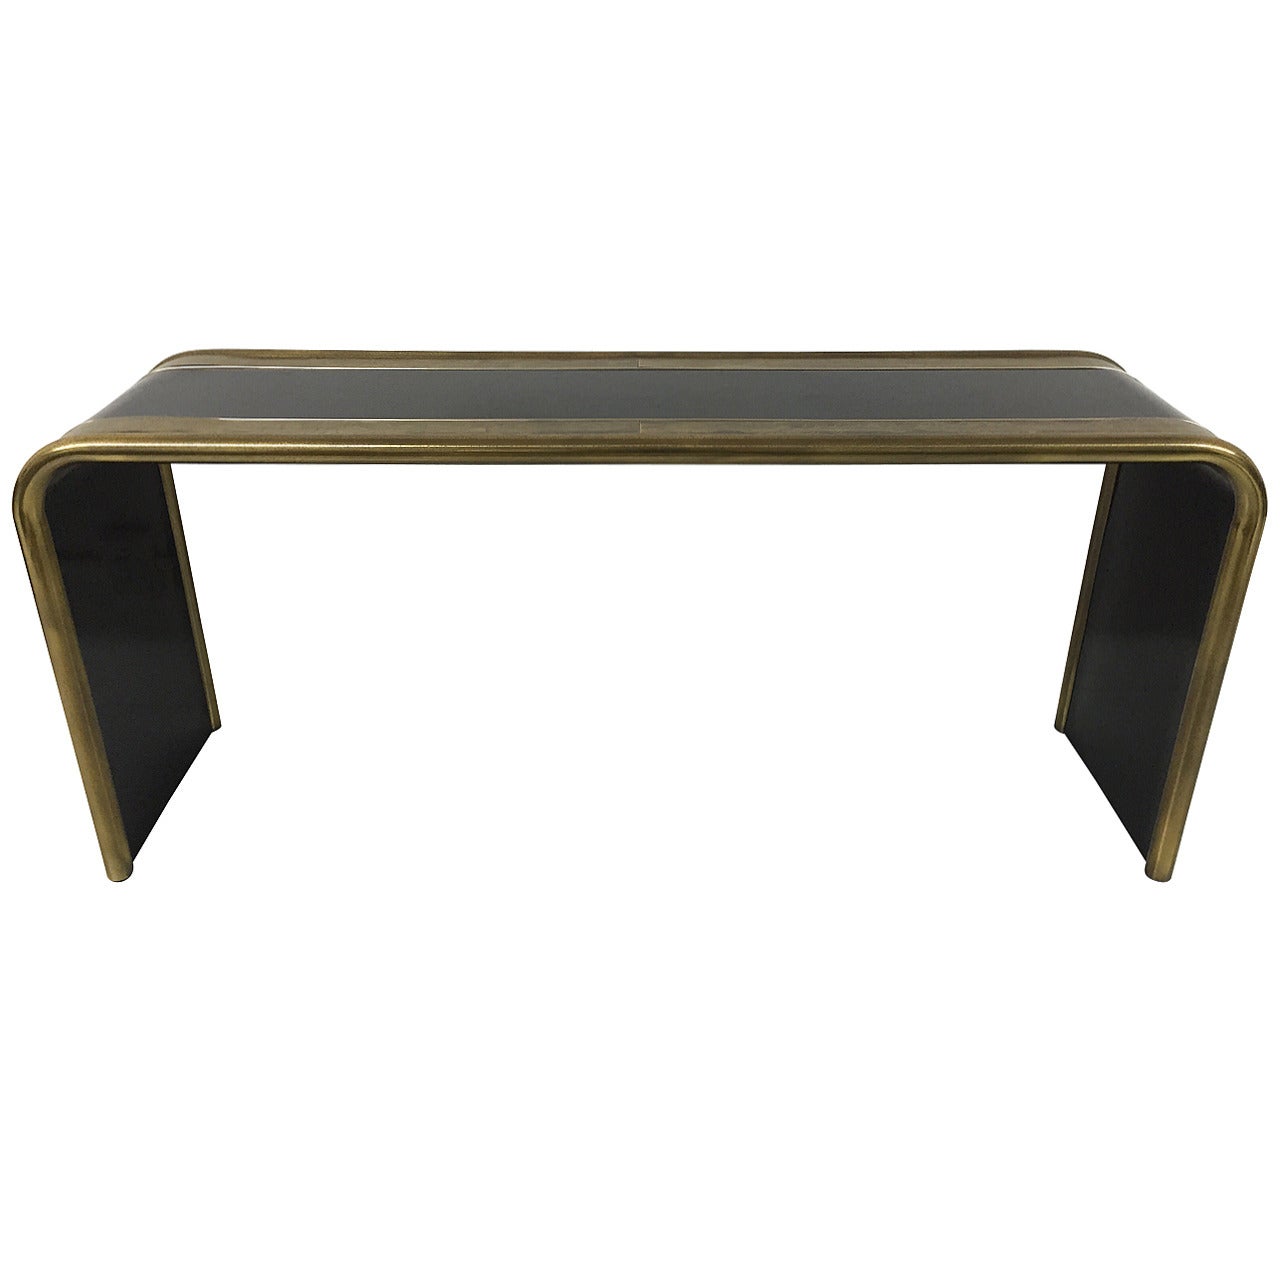 Bernhard Rohne Etched and Patinated Brass Console Table for Mastercraft